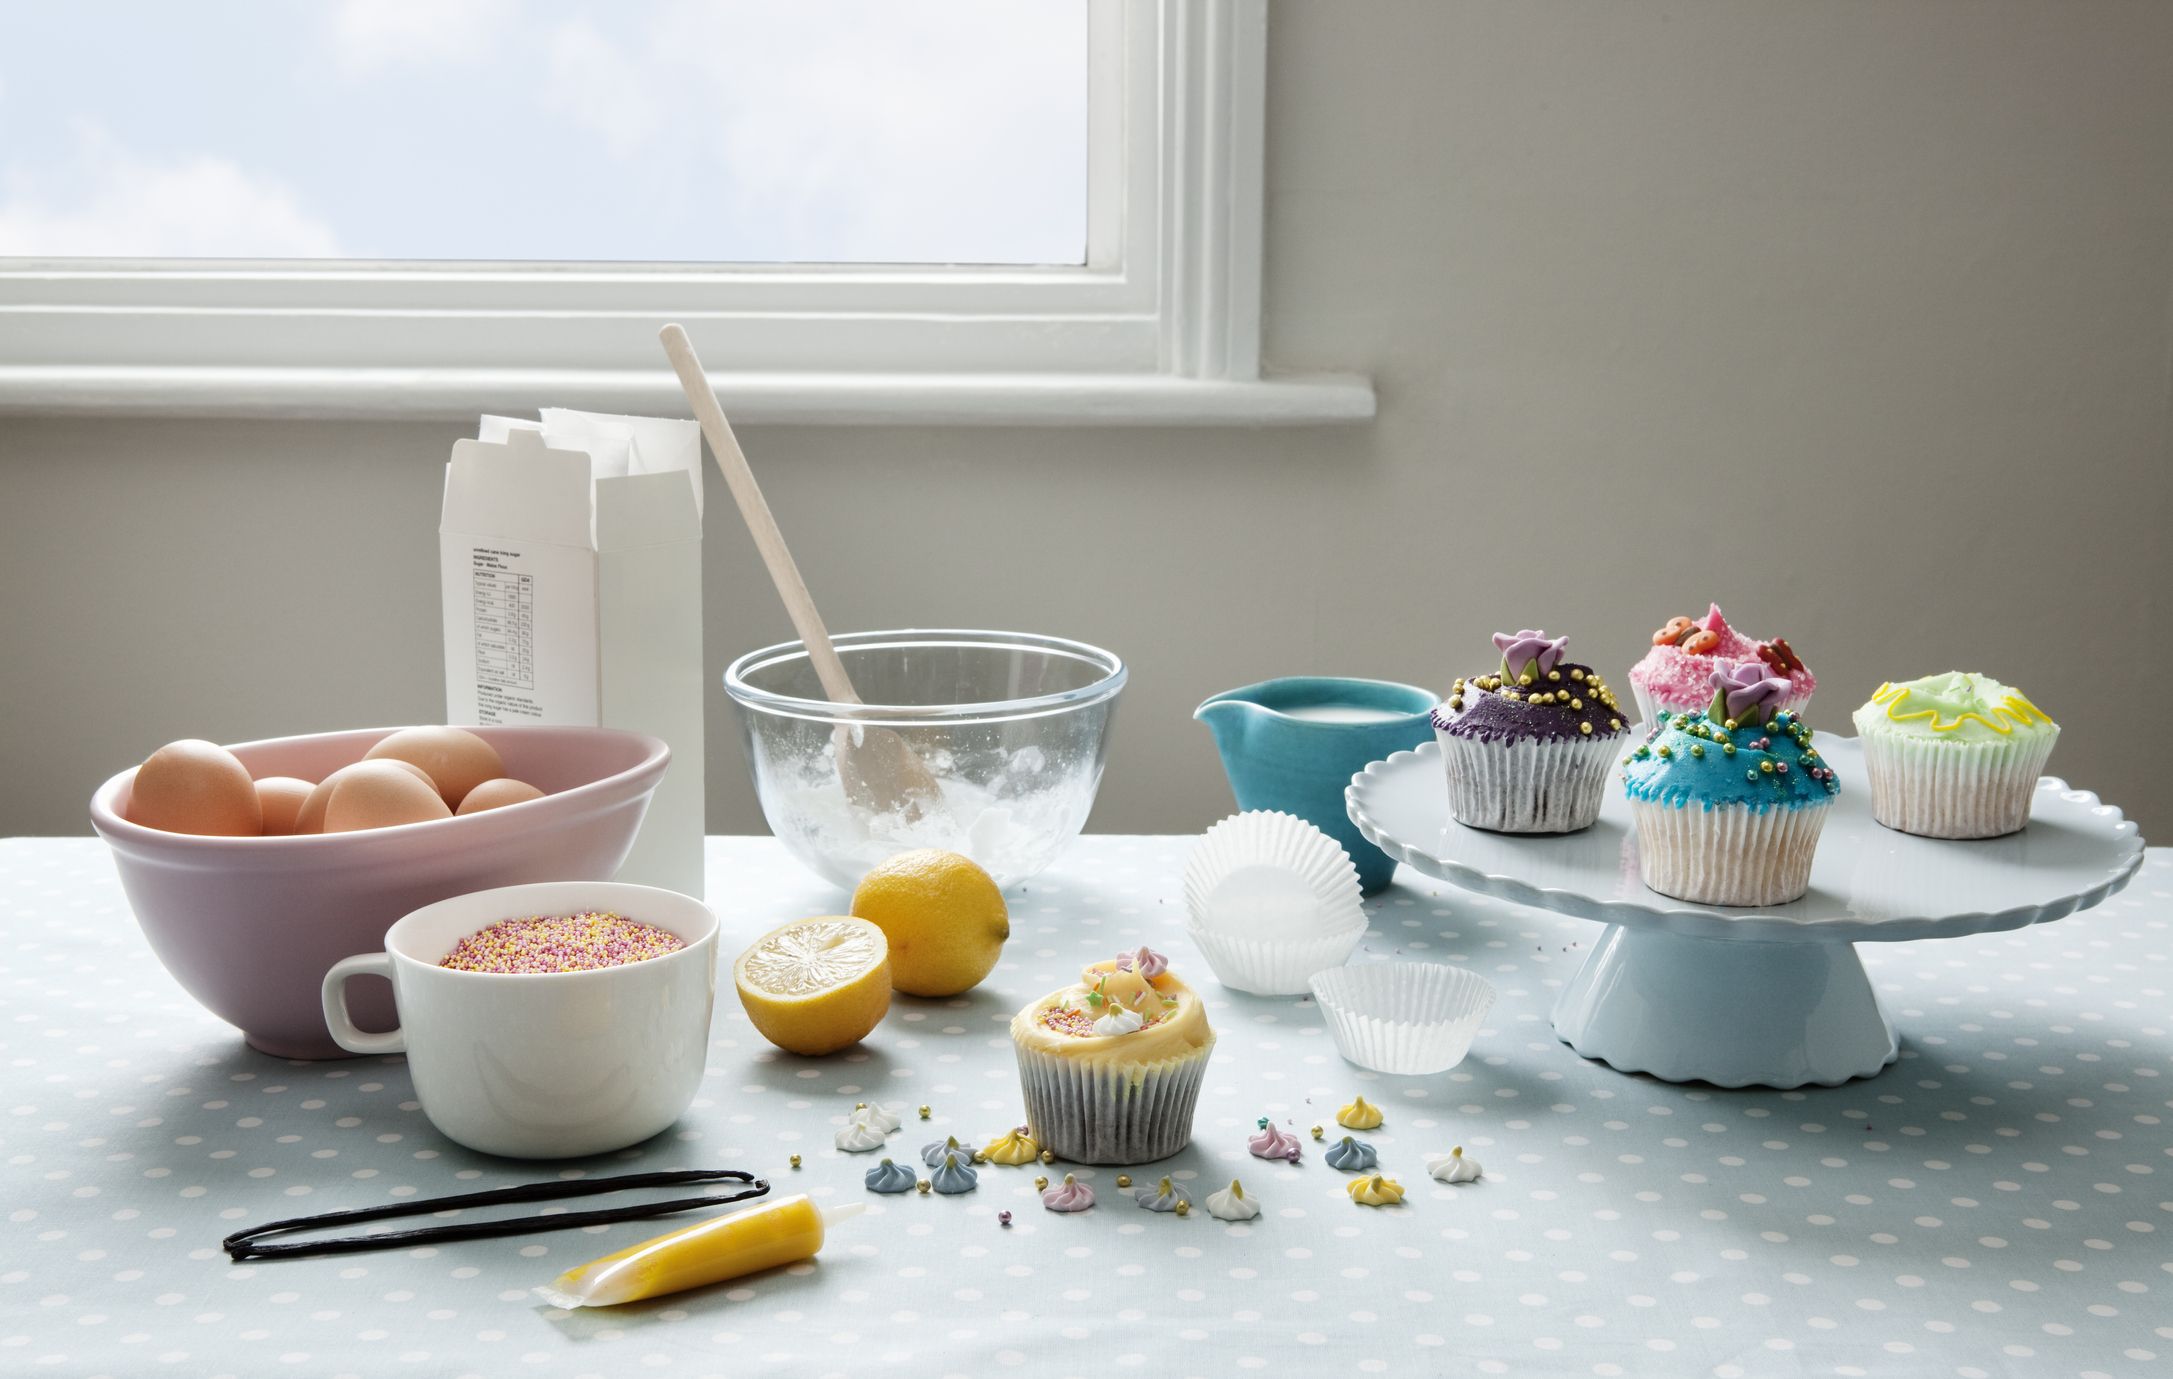 22 Essential Baking Supplies for Home Cooks